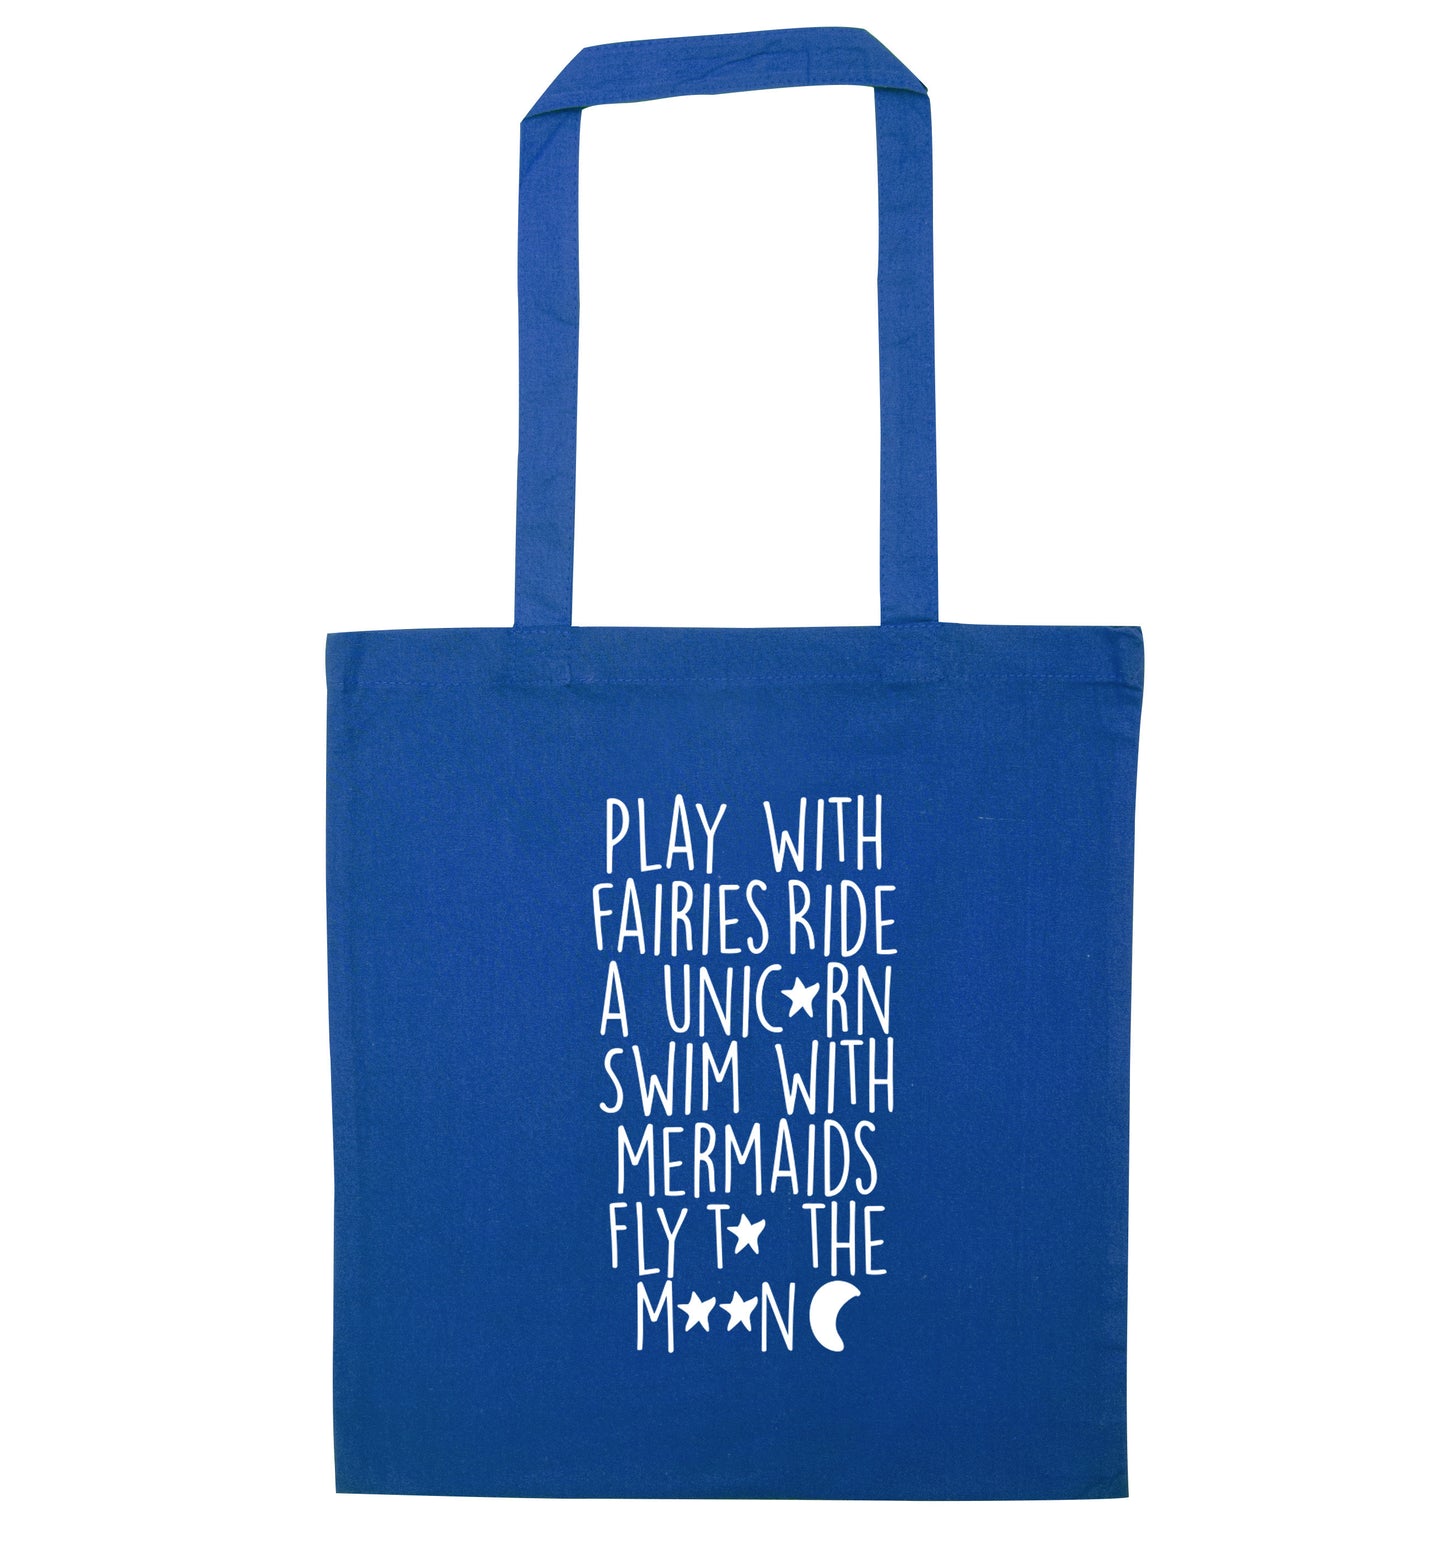 Play with fairies ride a unicorn swim with mermaids fly to the moon blue tote bag